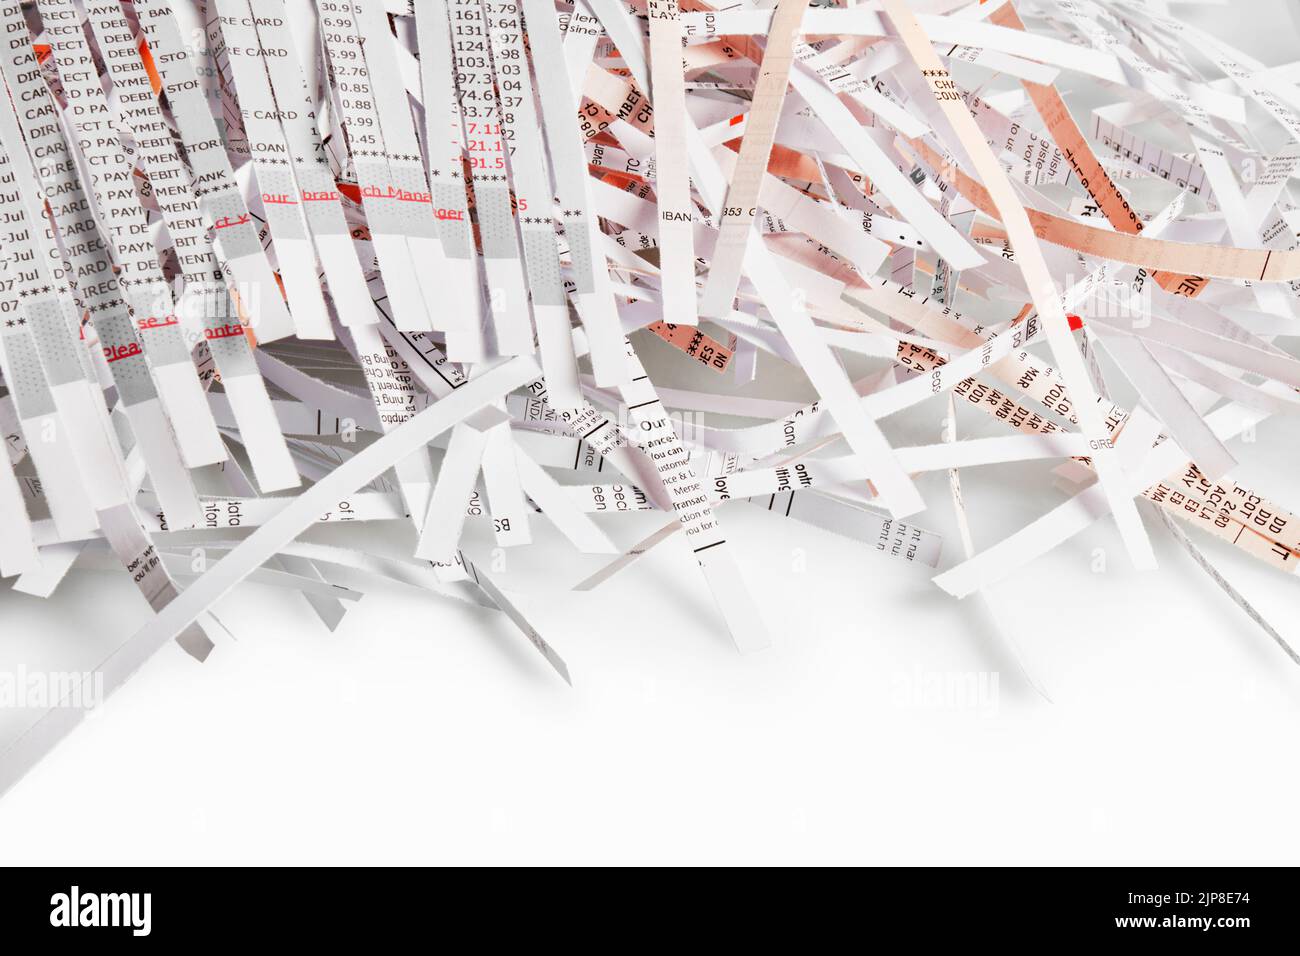 Shredded Bills and Bank Statements Stock Photo